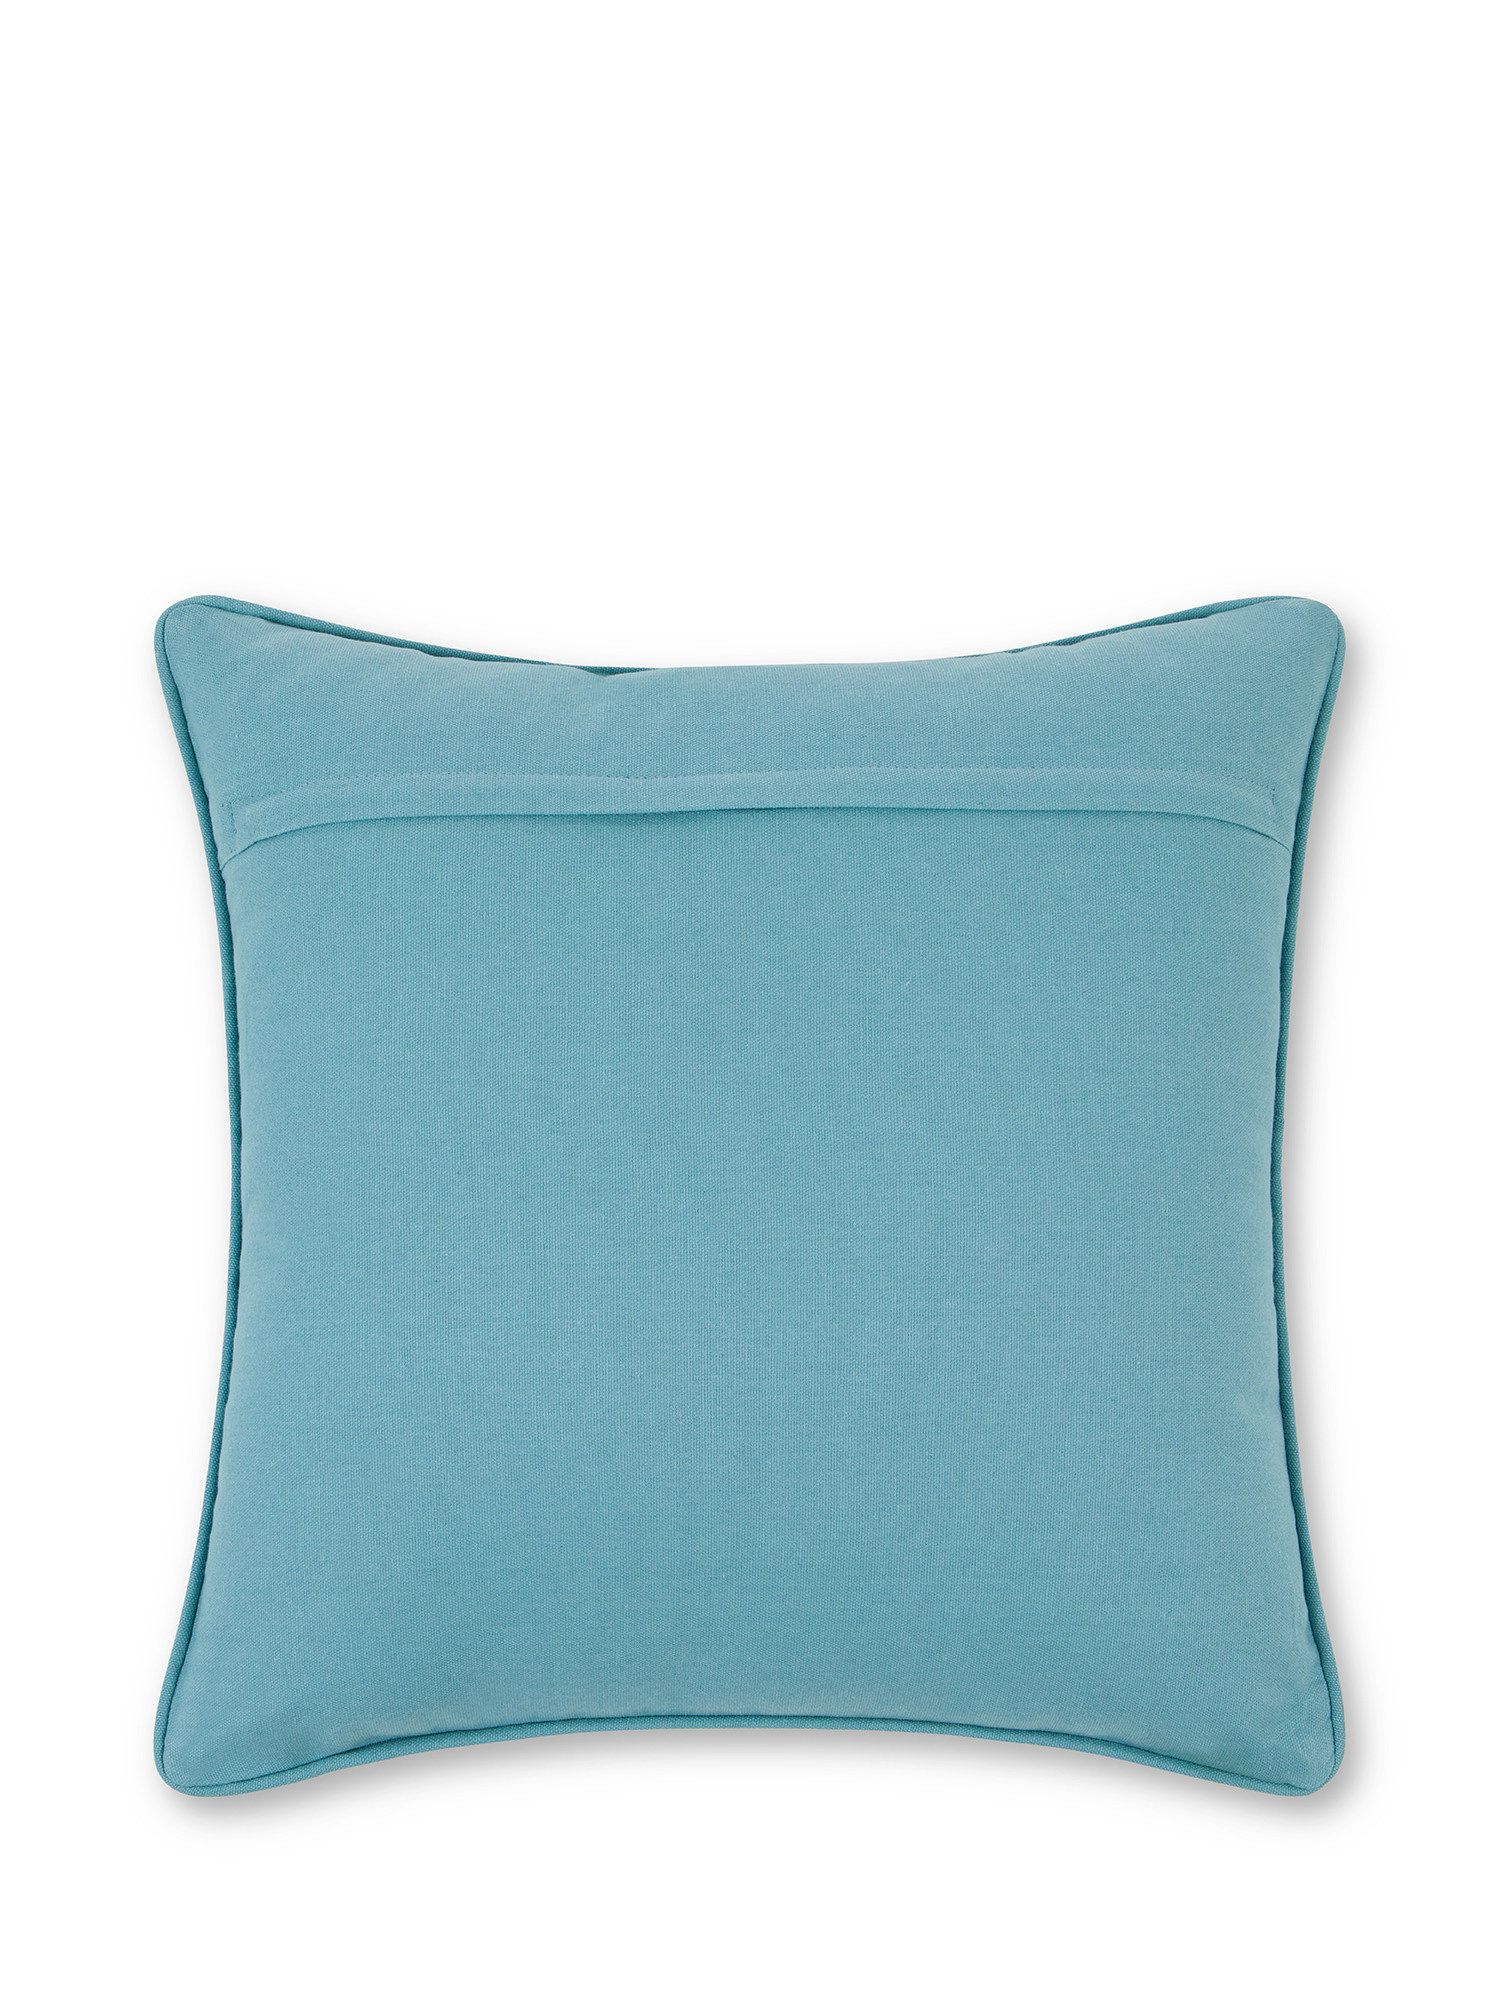 Embroidered cushion with majolica motif 45x45cm, Light Blue, large image number 1